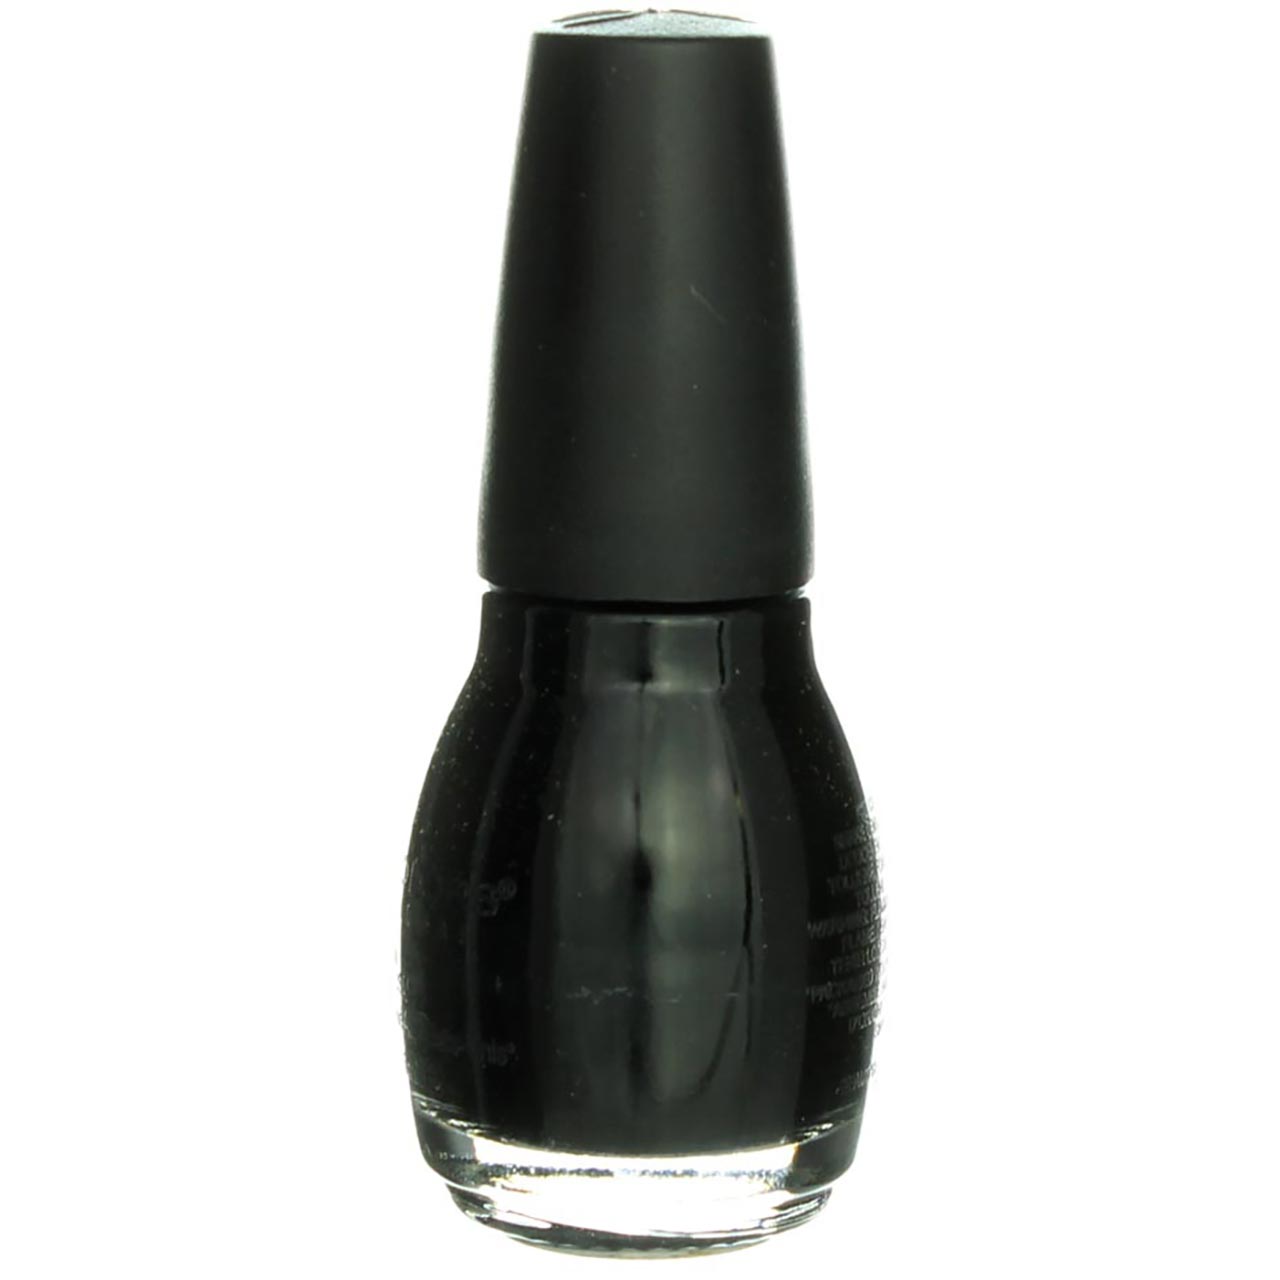 Sinful Colors Professional Nail Enamel, Black On Black 0.50 oz (Pack of 3) - image 4 of 4